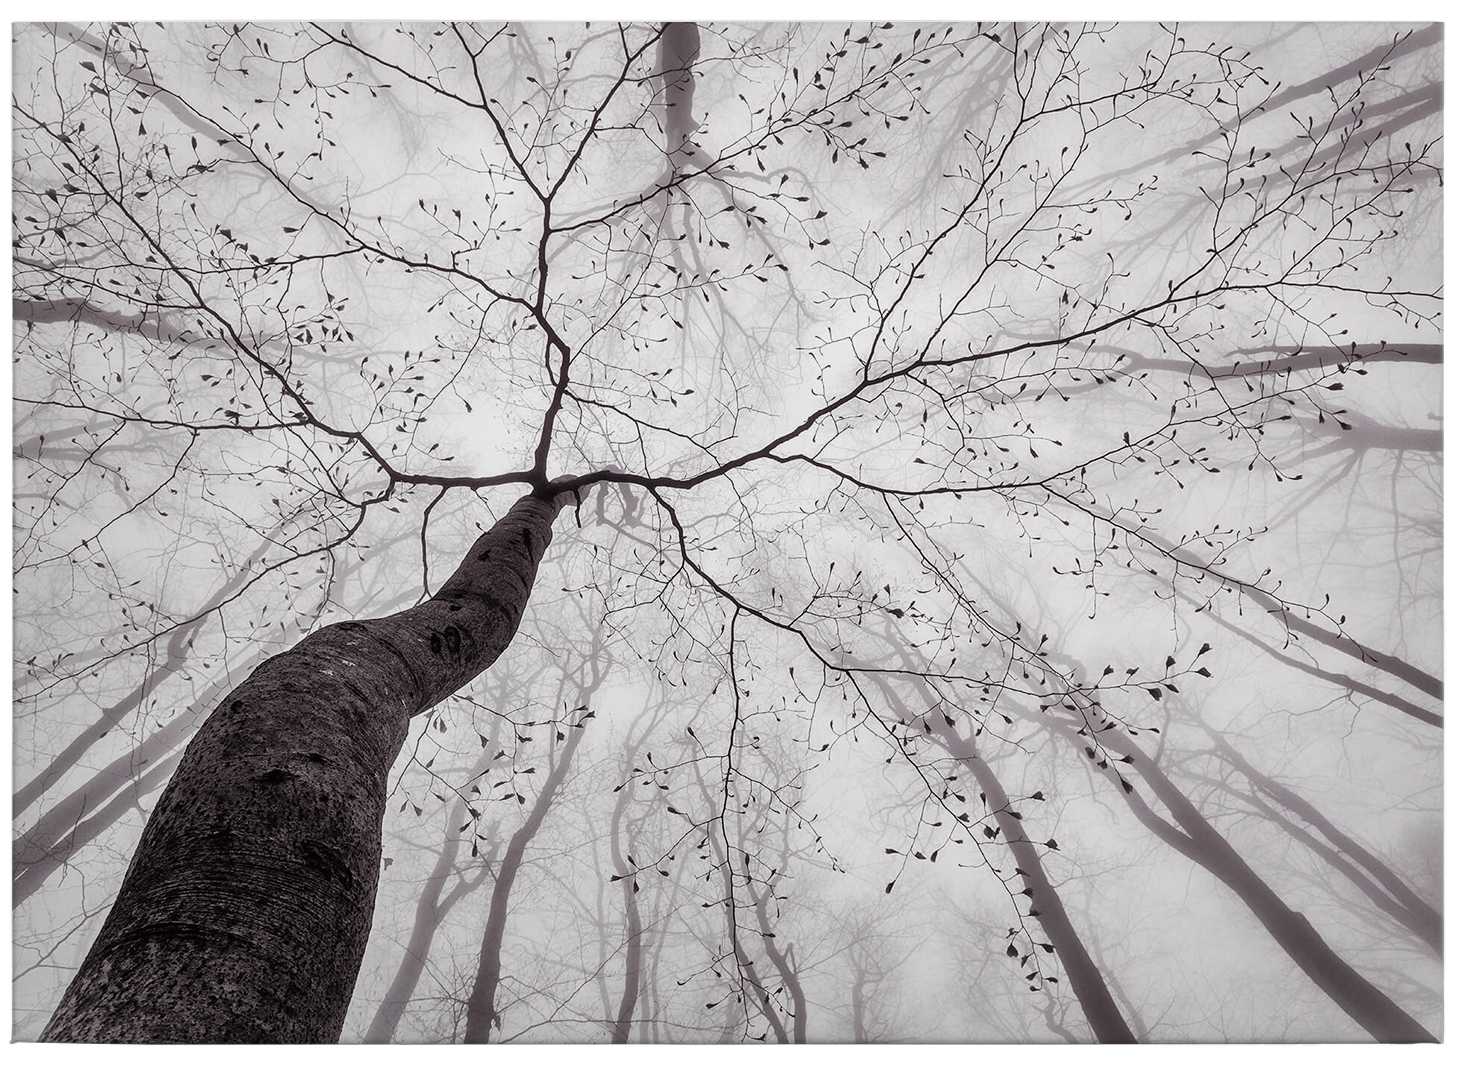             Black and white canvas print tree tops in the fog
        